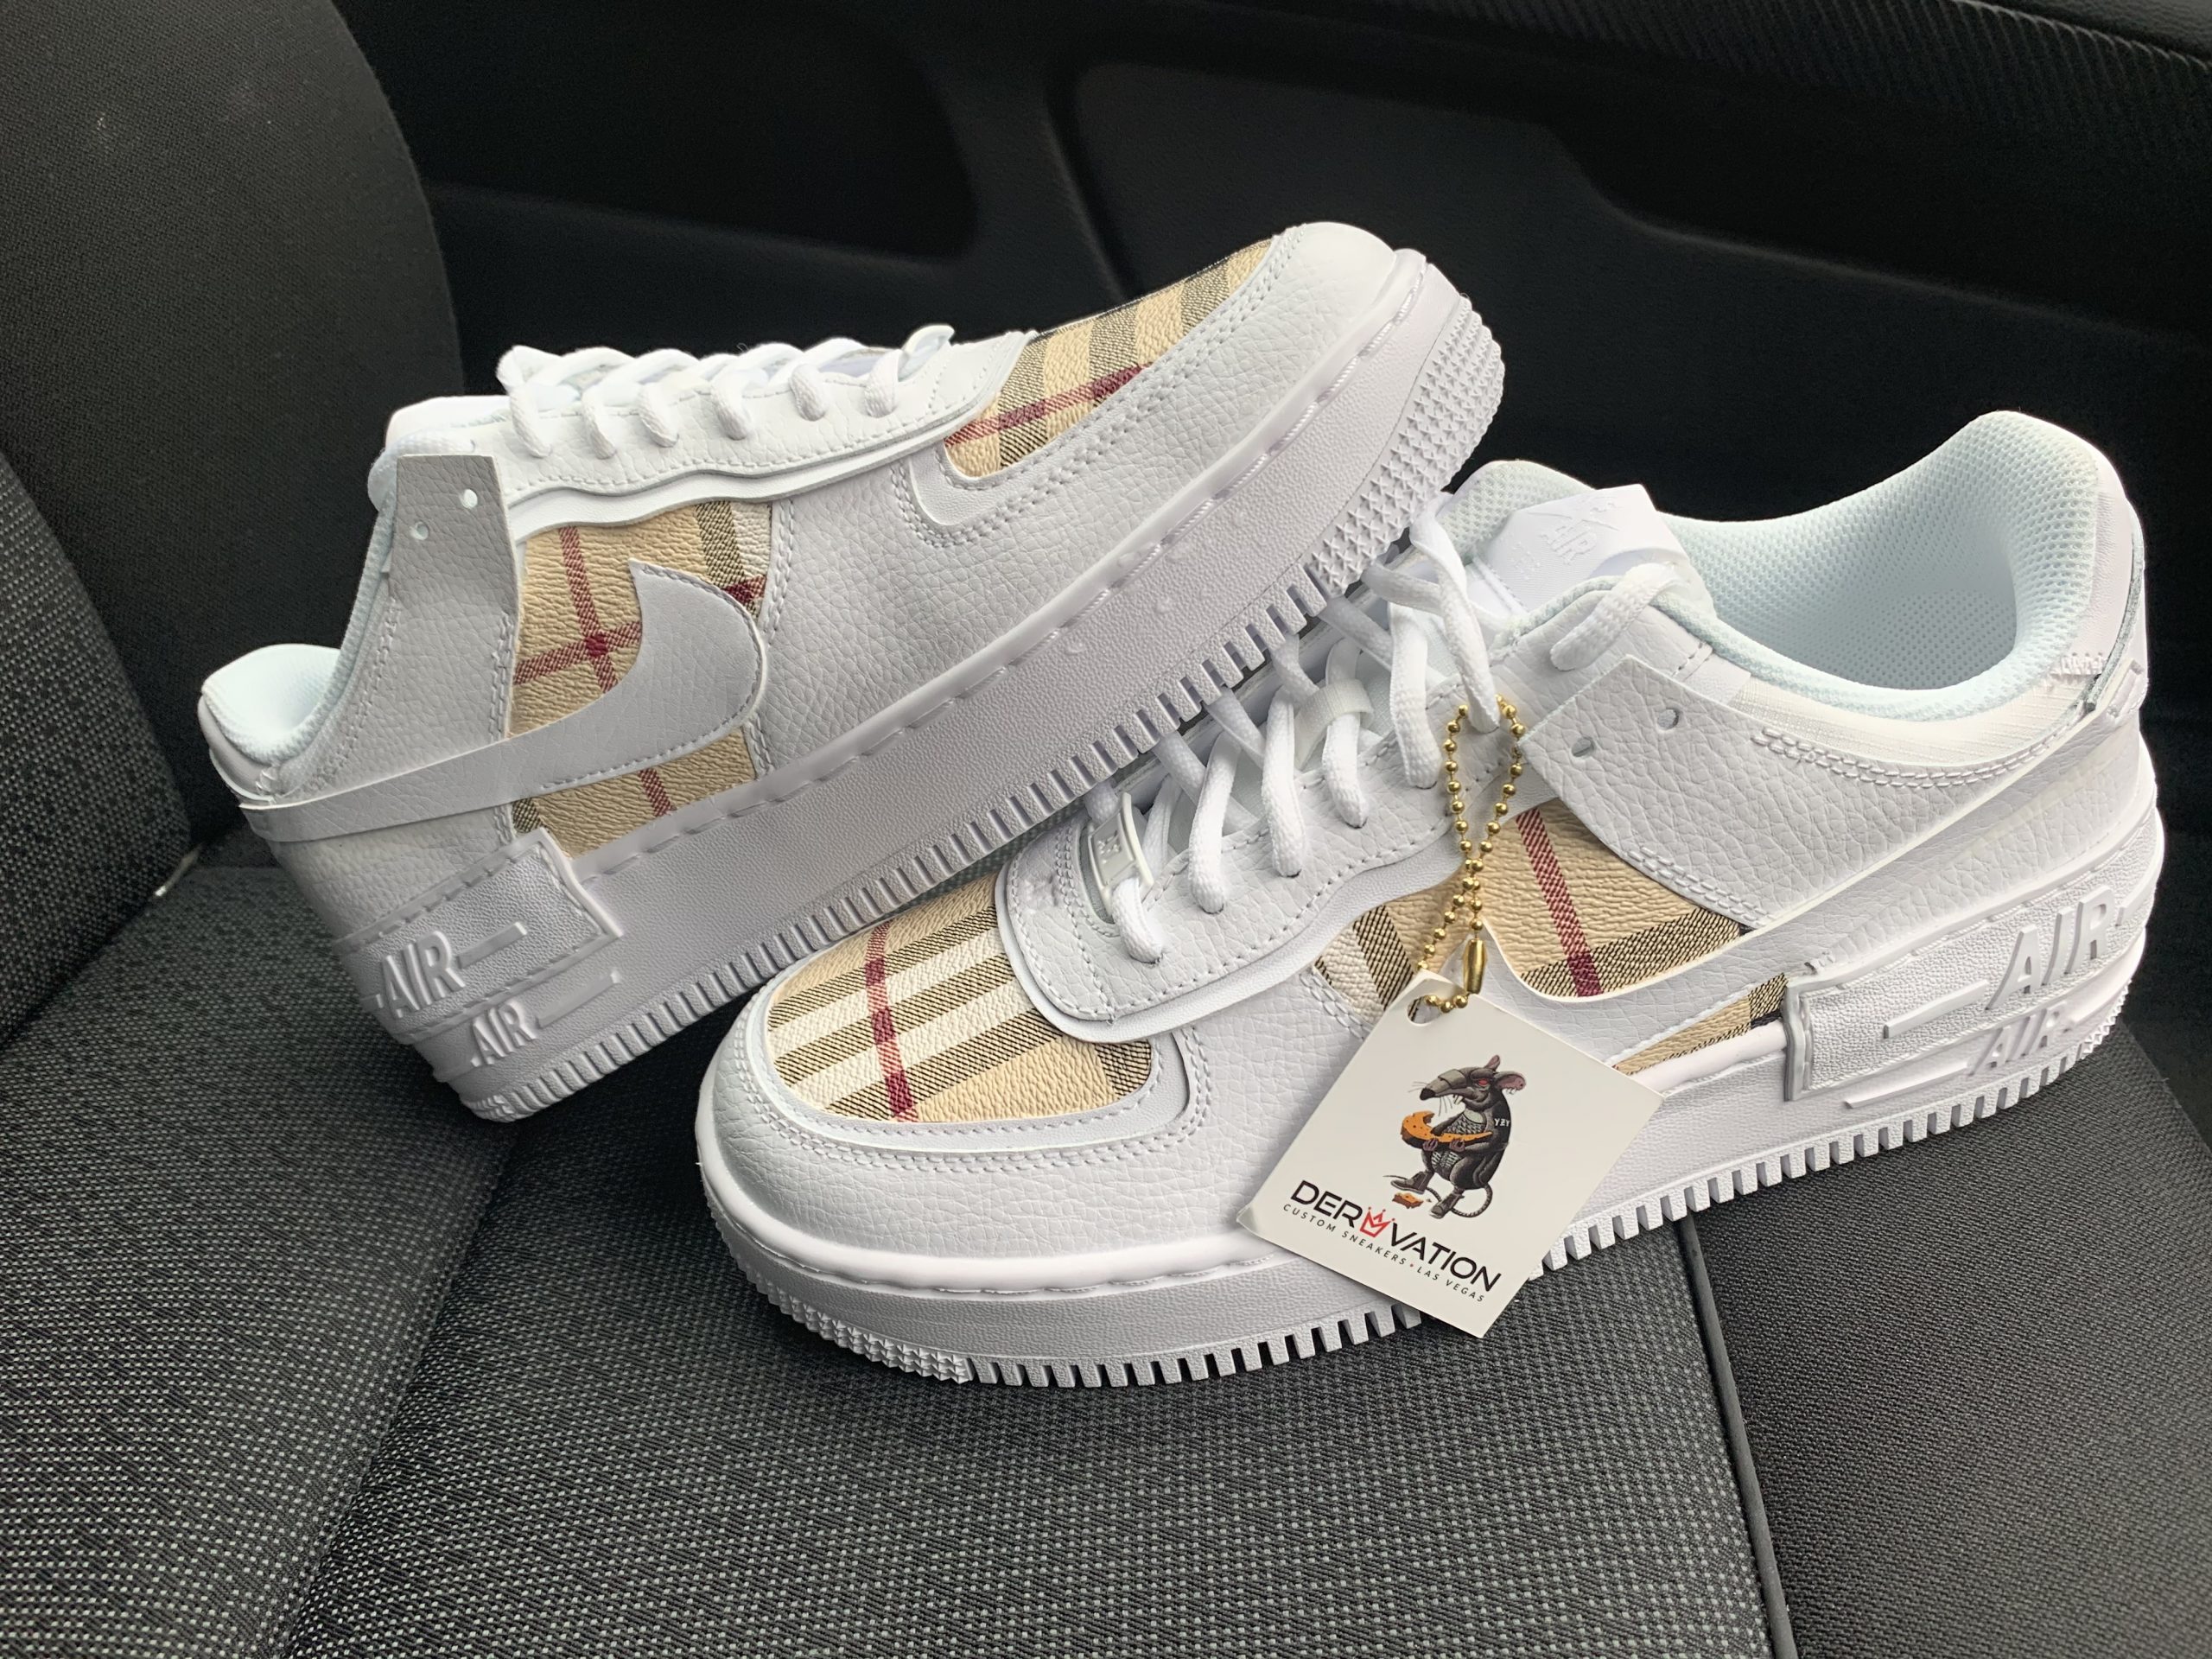 burberry air force 1 uk